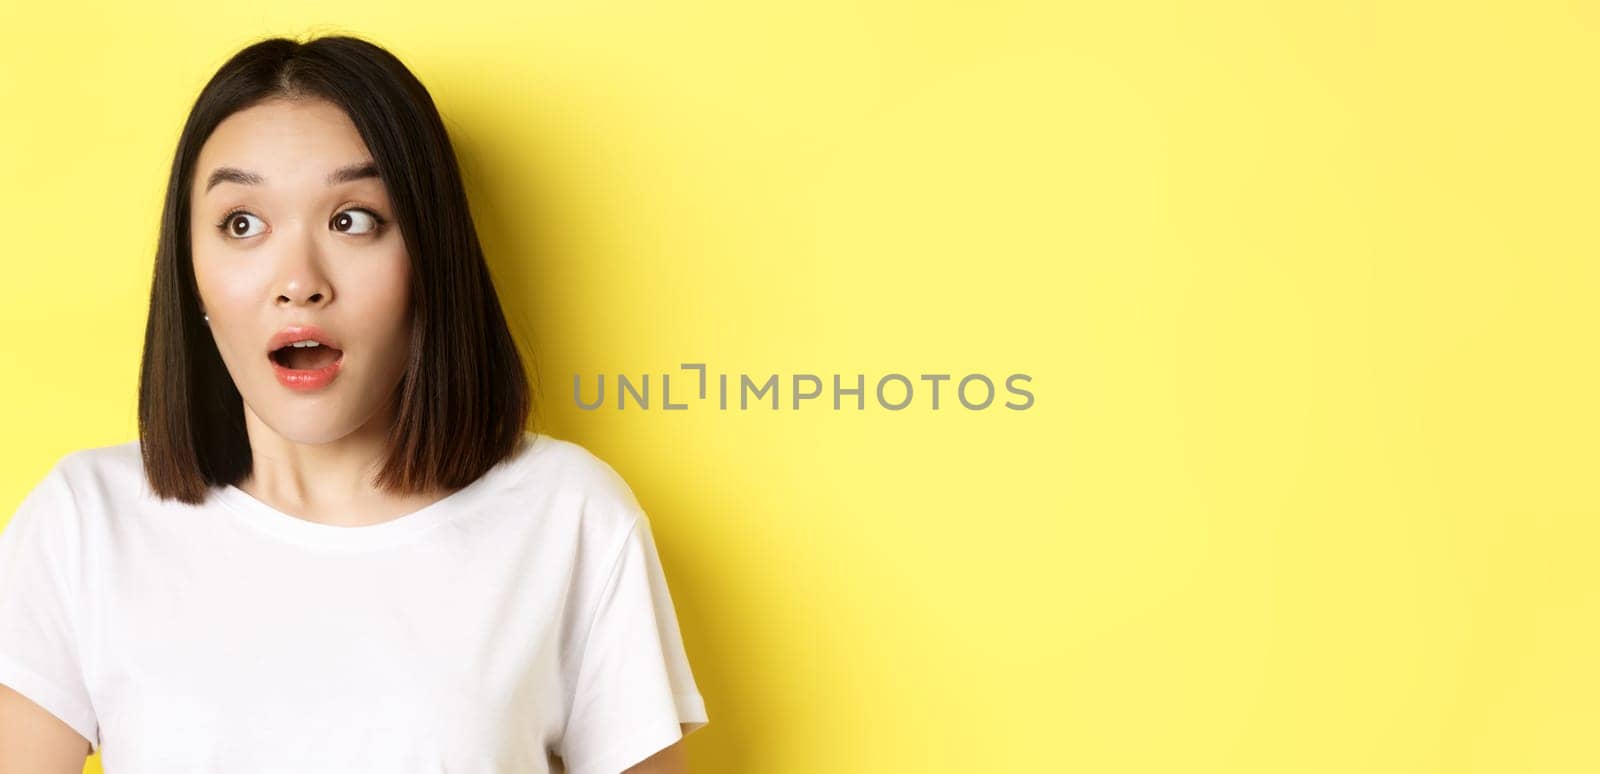 Close up of surprised asian girl drop jaw, gasping and looking left at logo, standing over yellow background by Benzoix